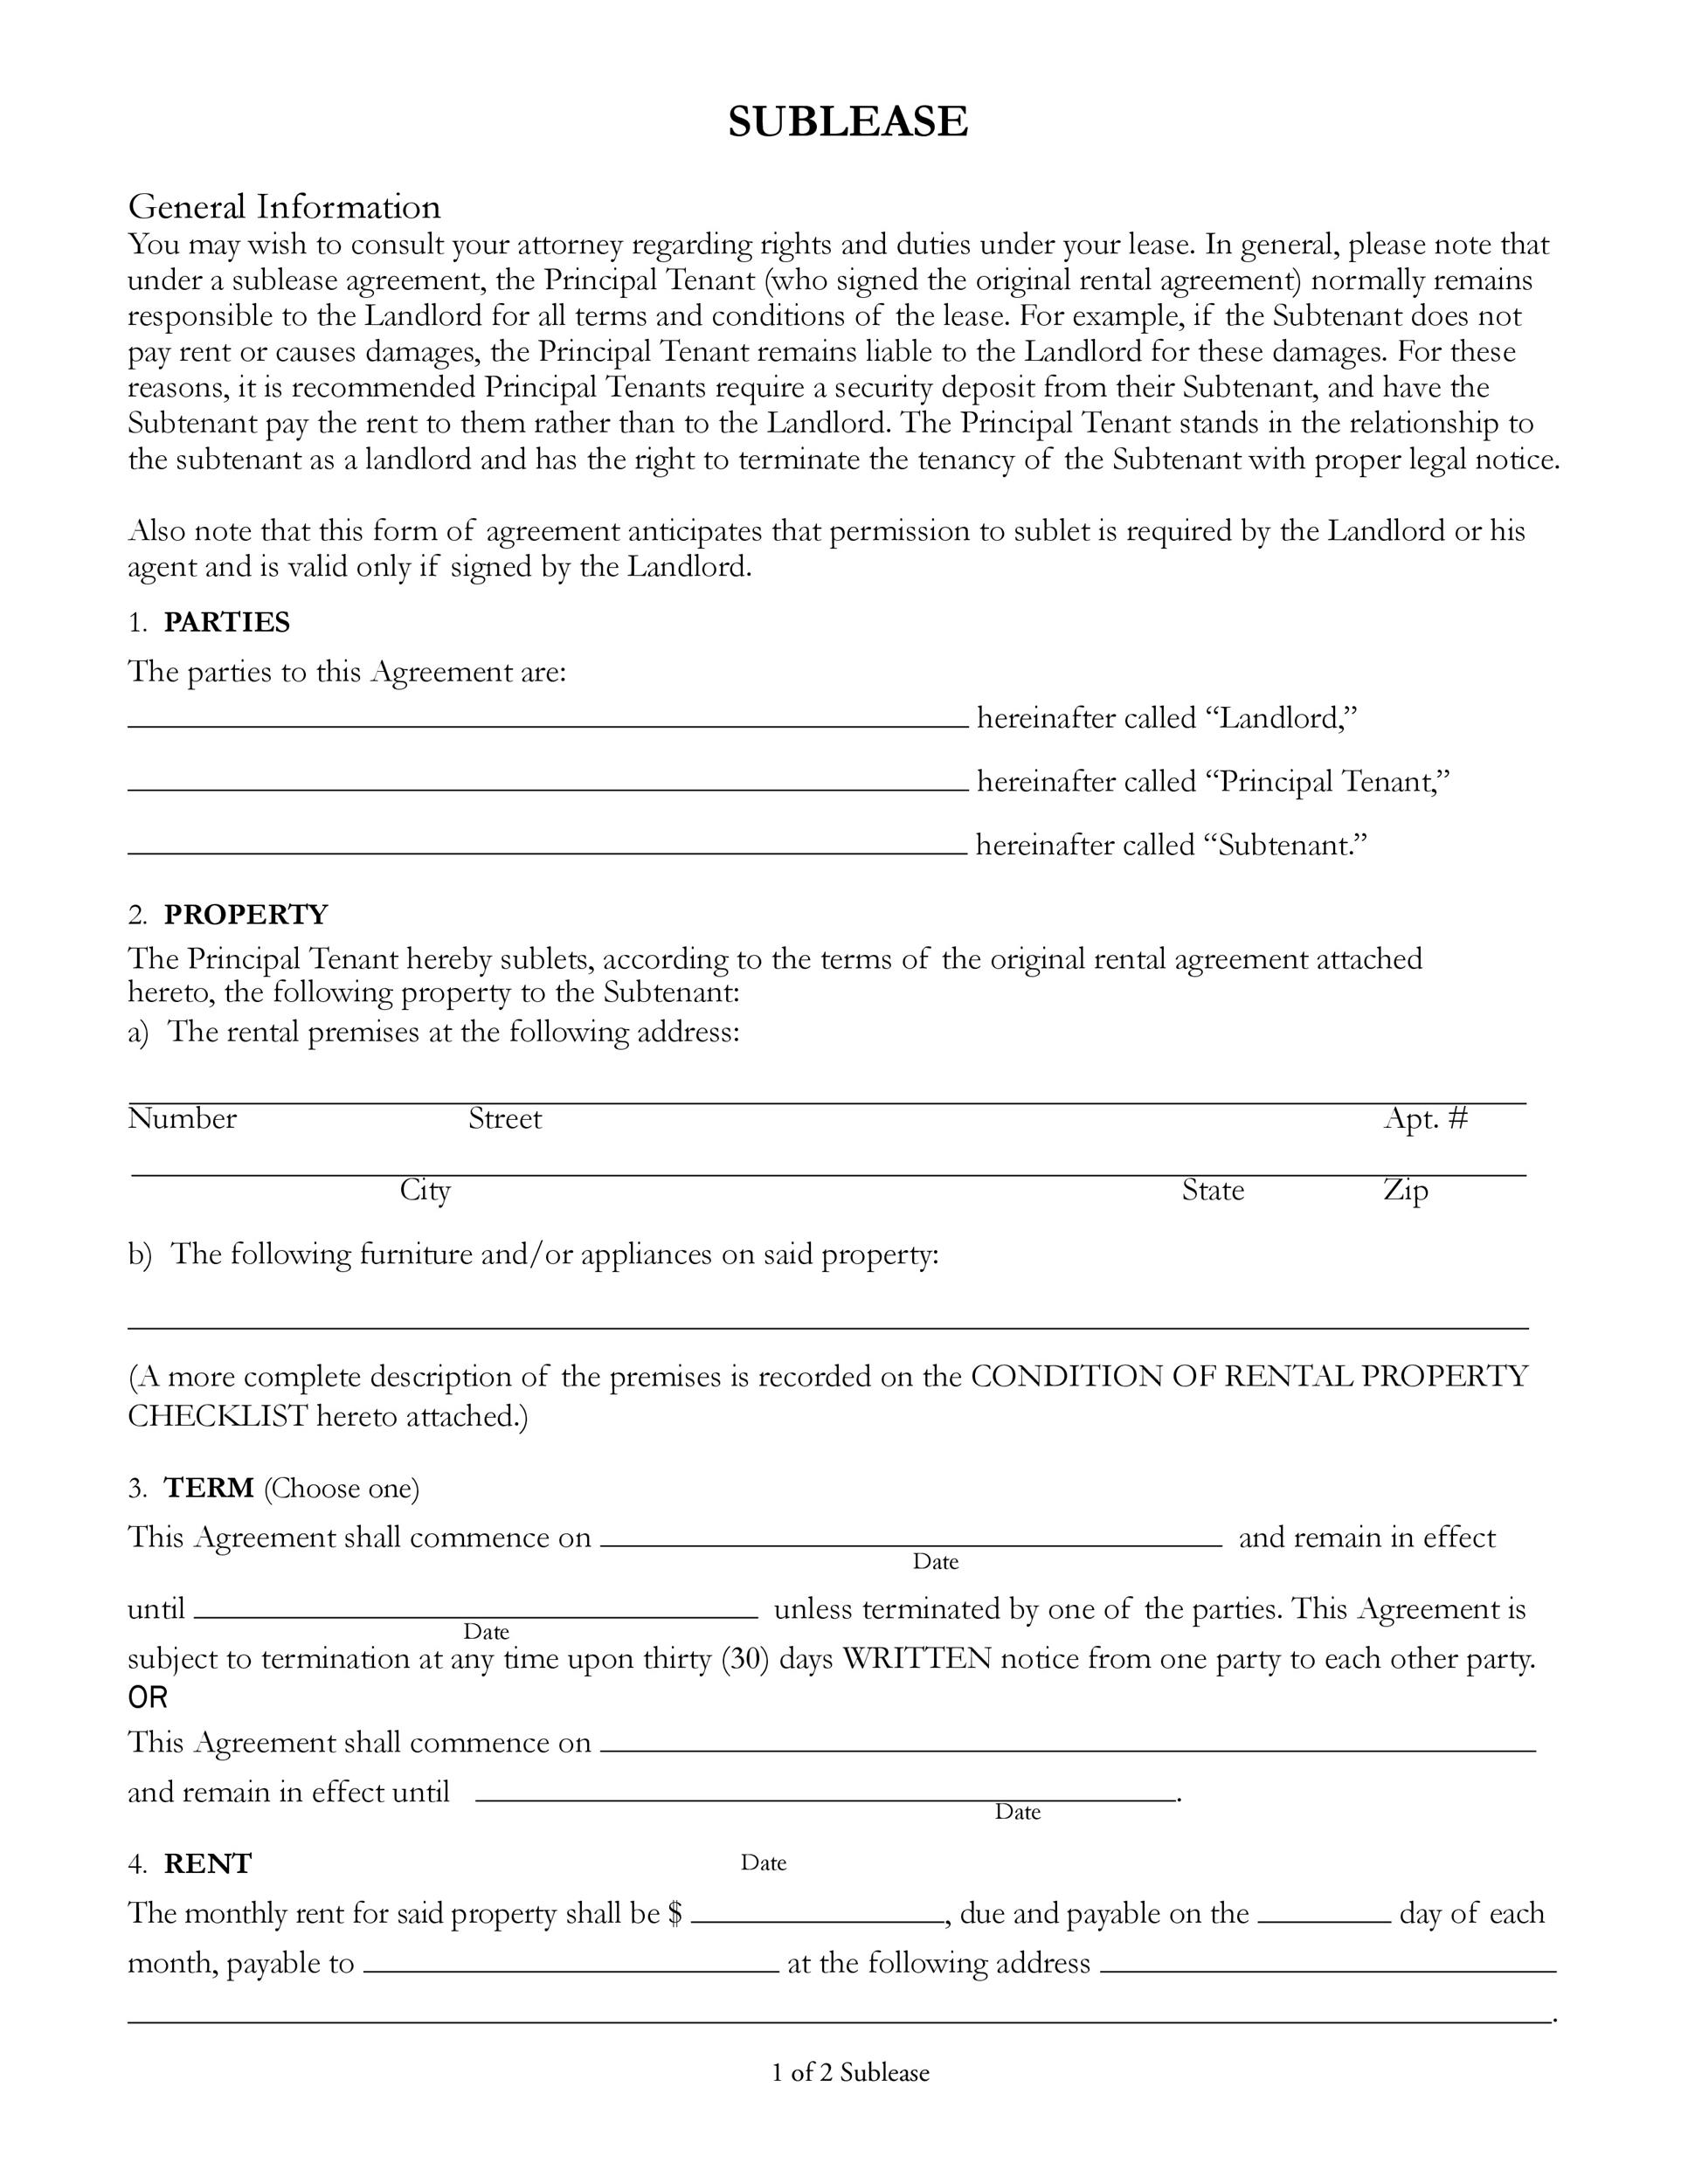 40+ Professional Sublease Agreement Templates & Forms Template Lab